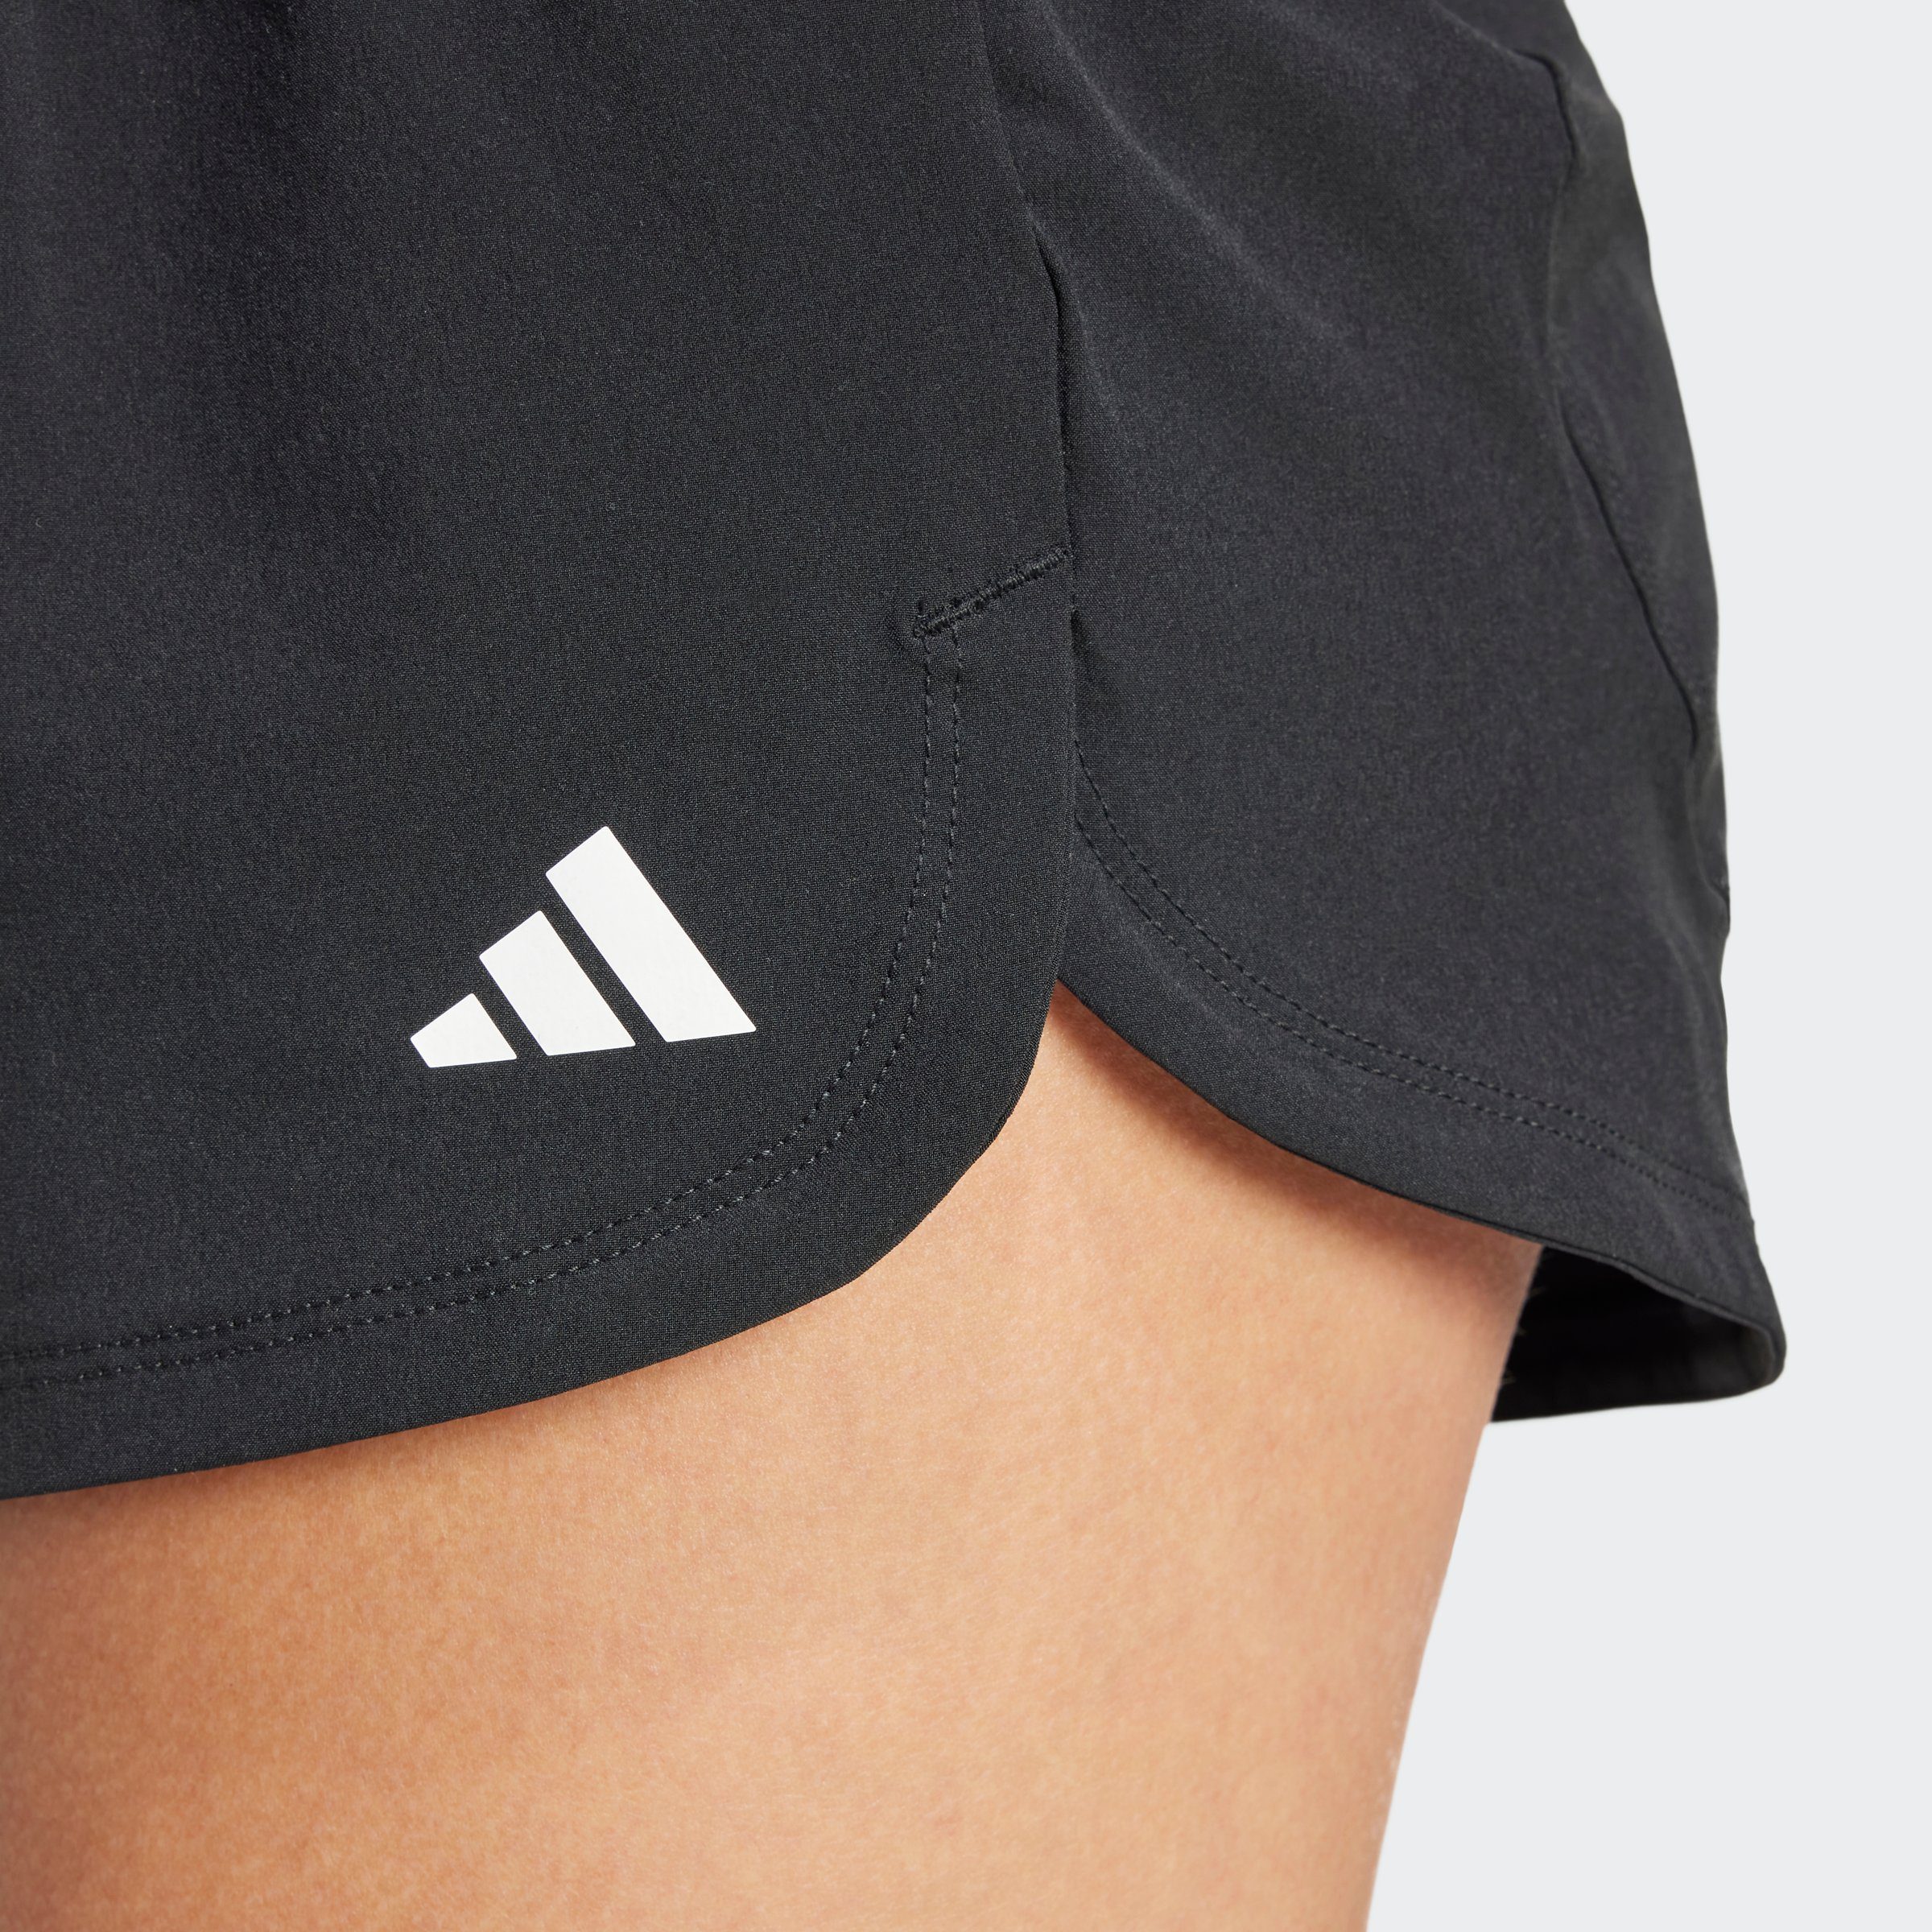 adidas Performance Short PACER MATERNITY (1-delig)